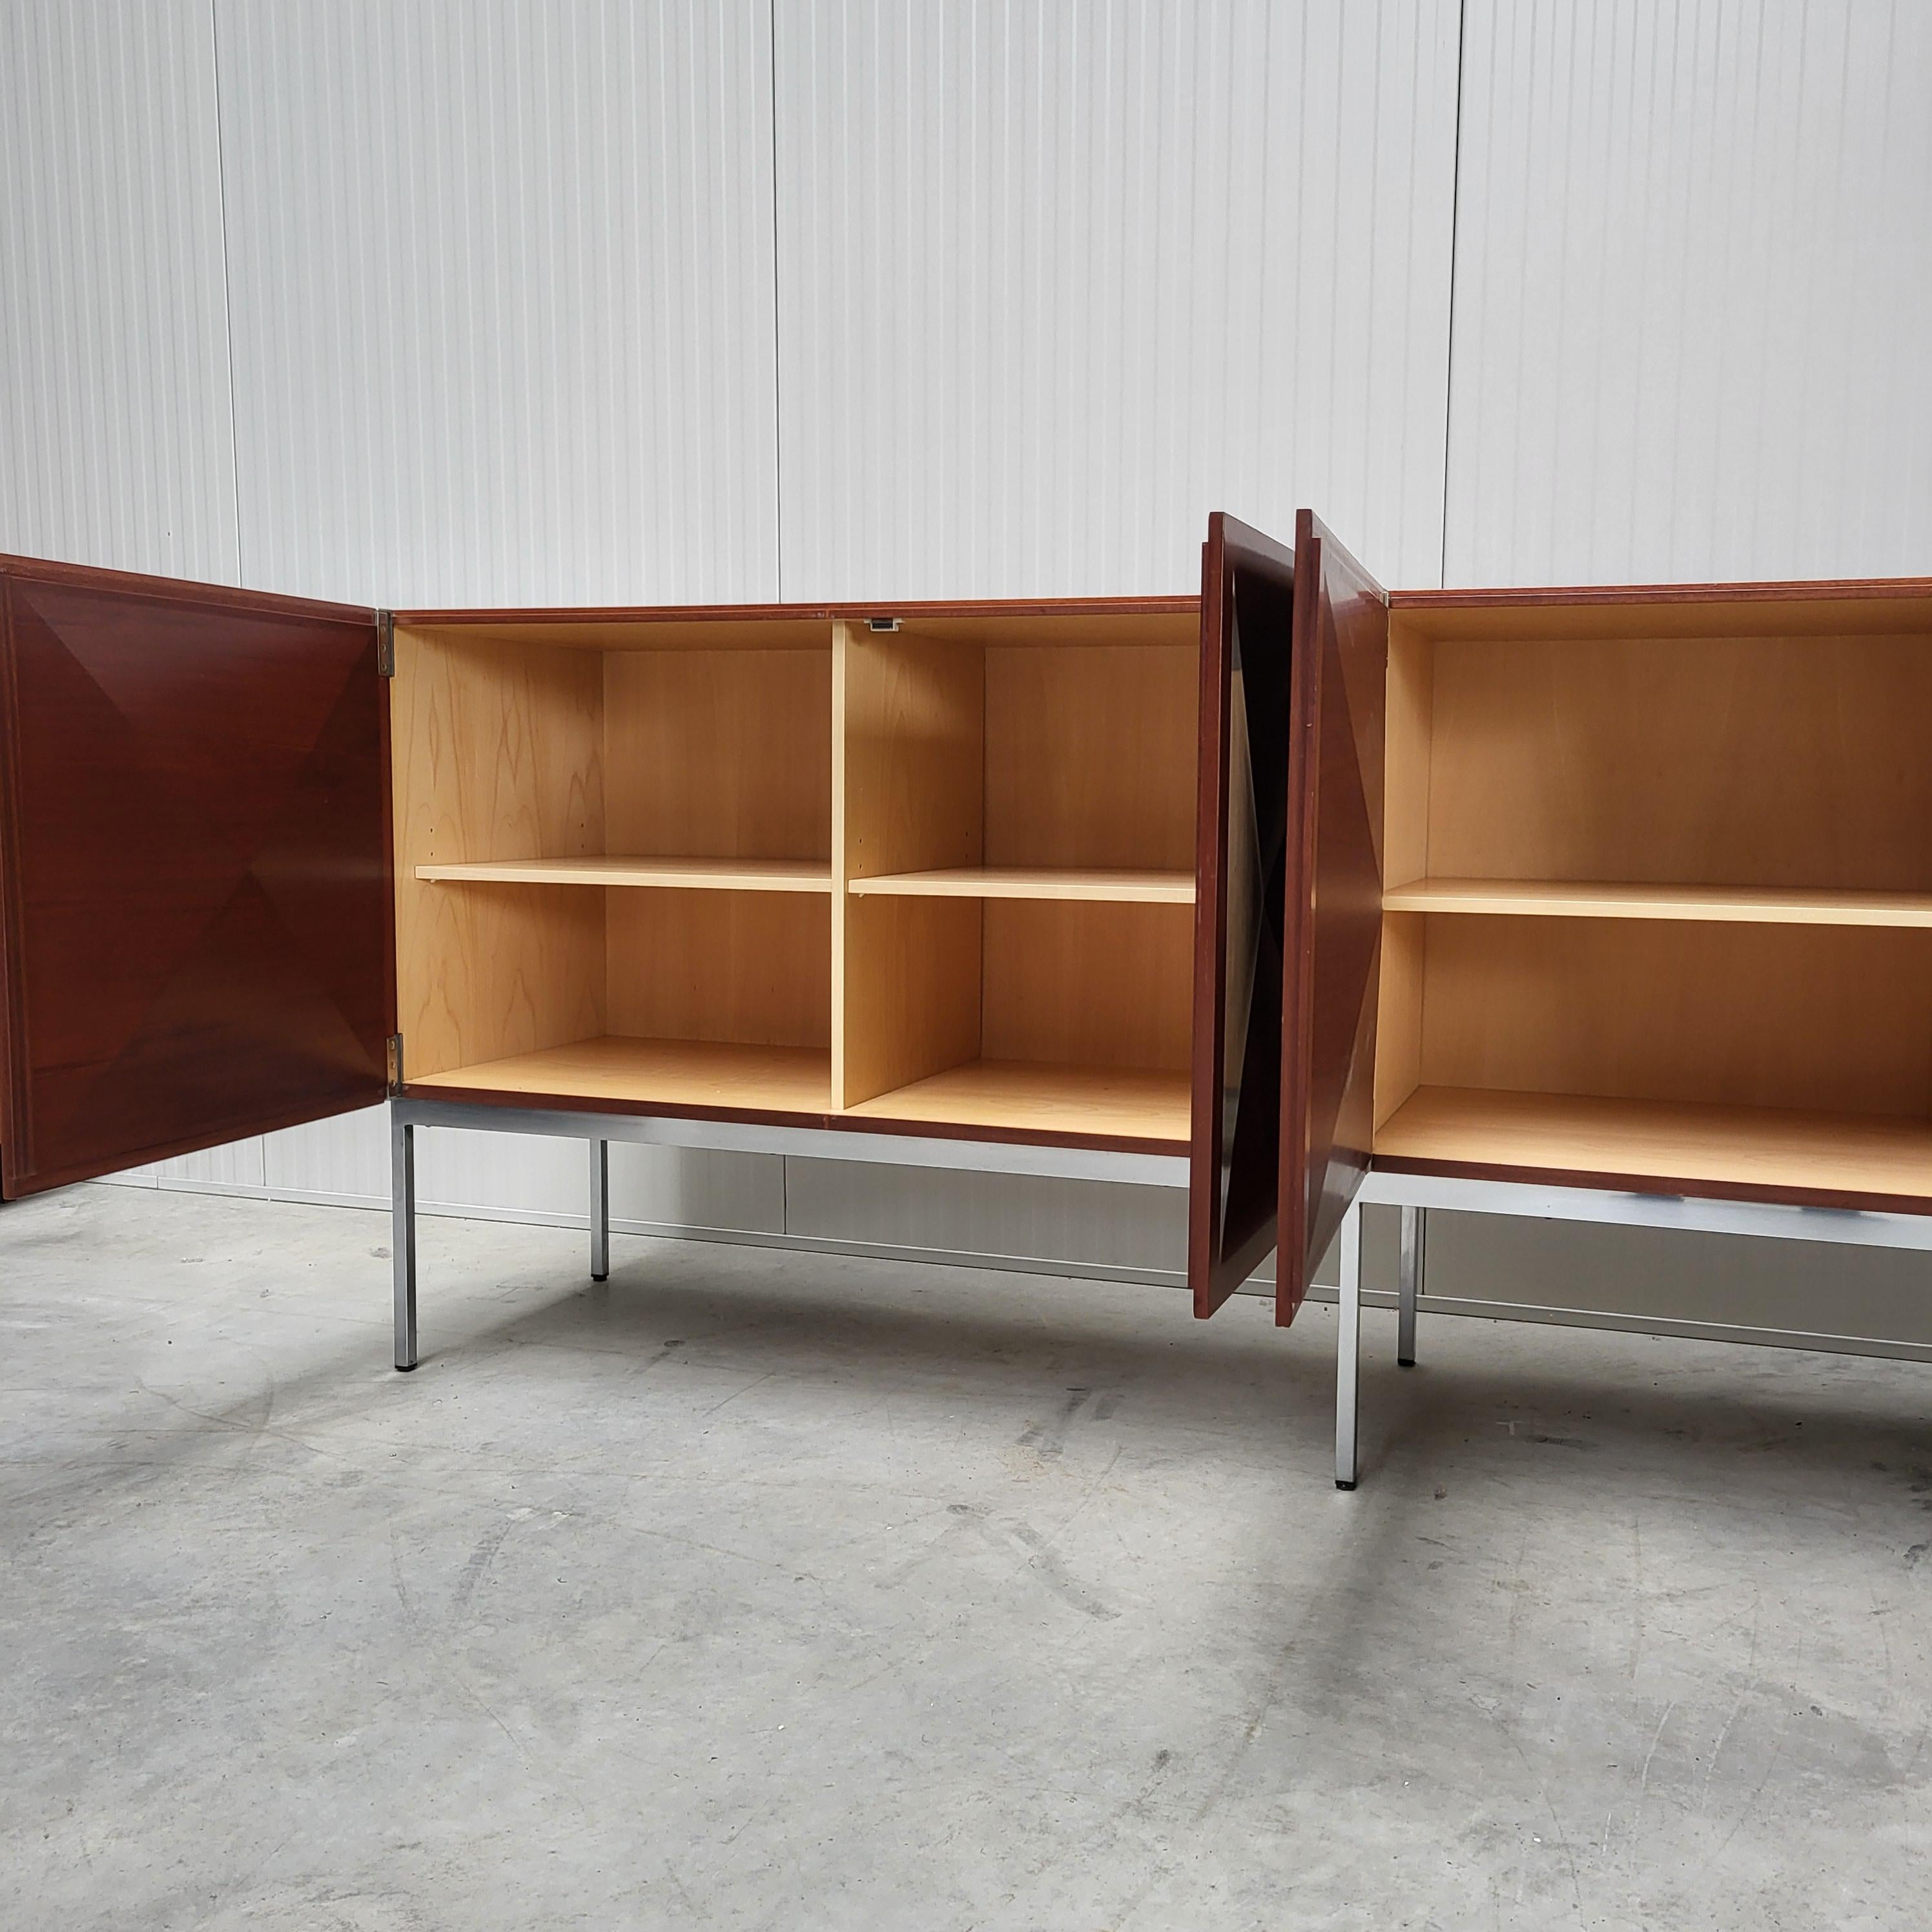 Mid-20th Century A. Philippon & J. Lecoq Pointe de Diamant Sideboard Credenza by Behr 1962 For Sale